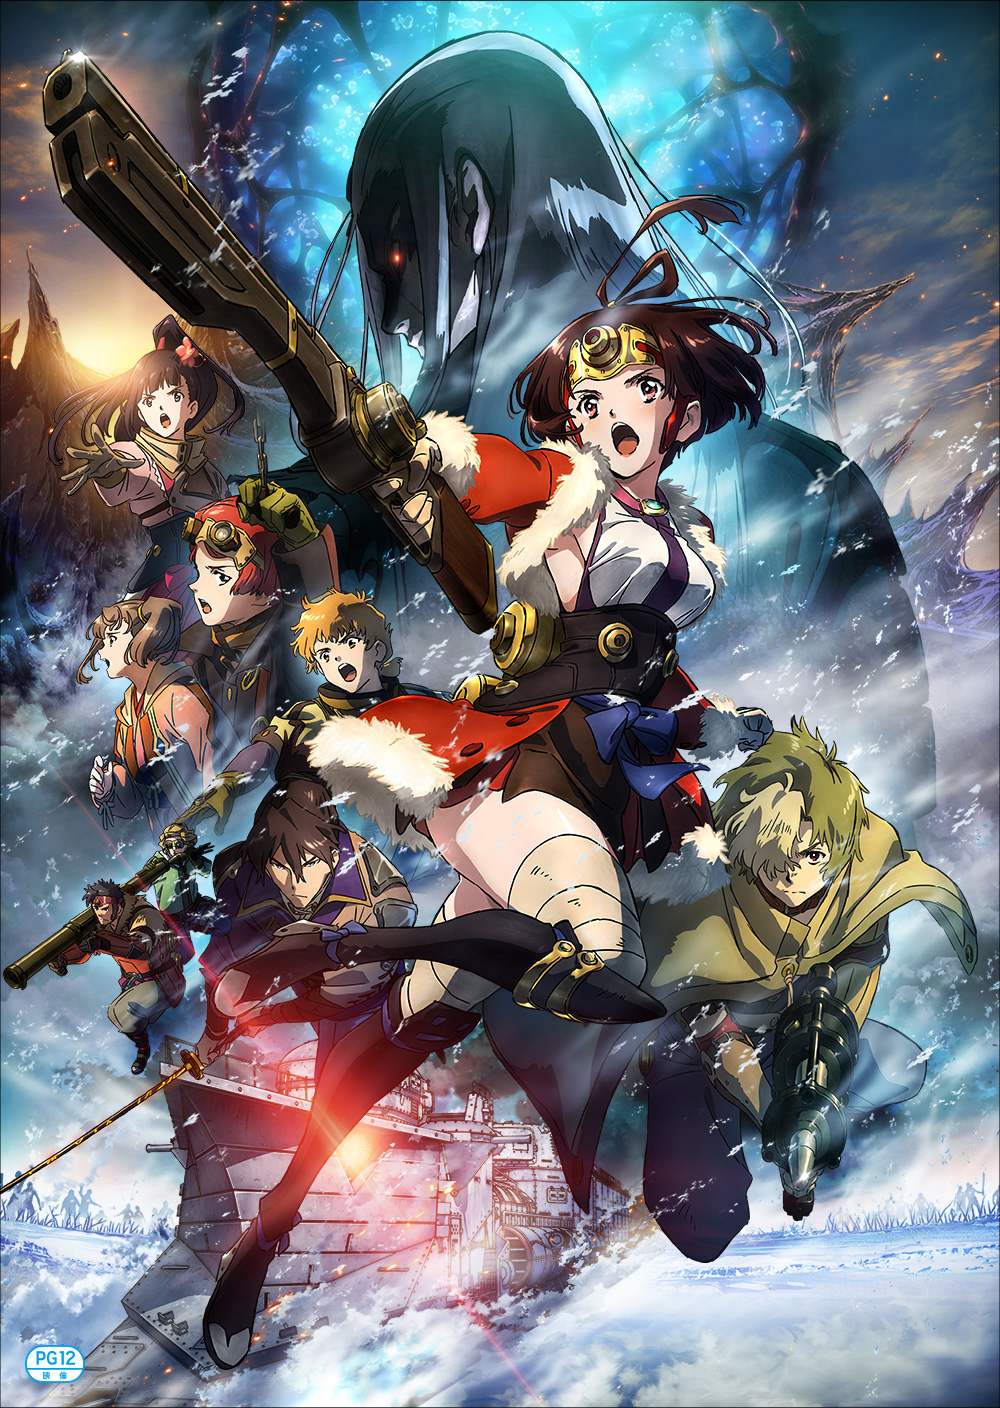 Kabaneri Of The Iron Fortress The Battle Of Unato Koutetsujou No Kabaneri Kabaneri Of The Iron Fortress Wikia Fandom